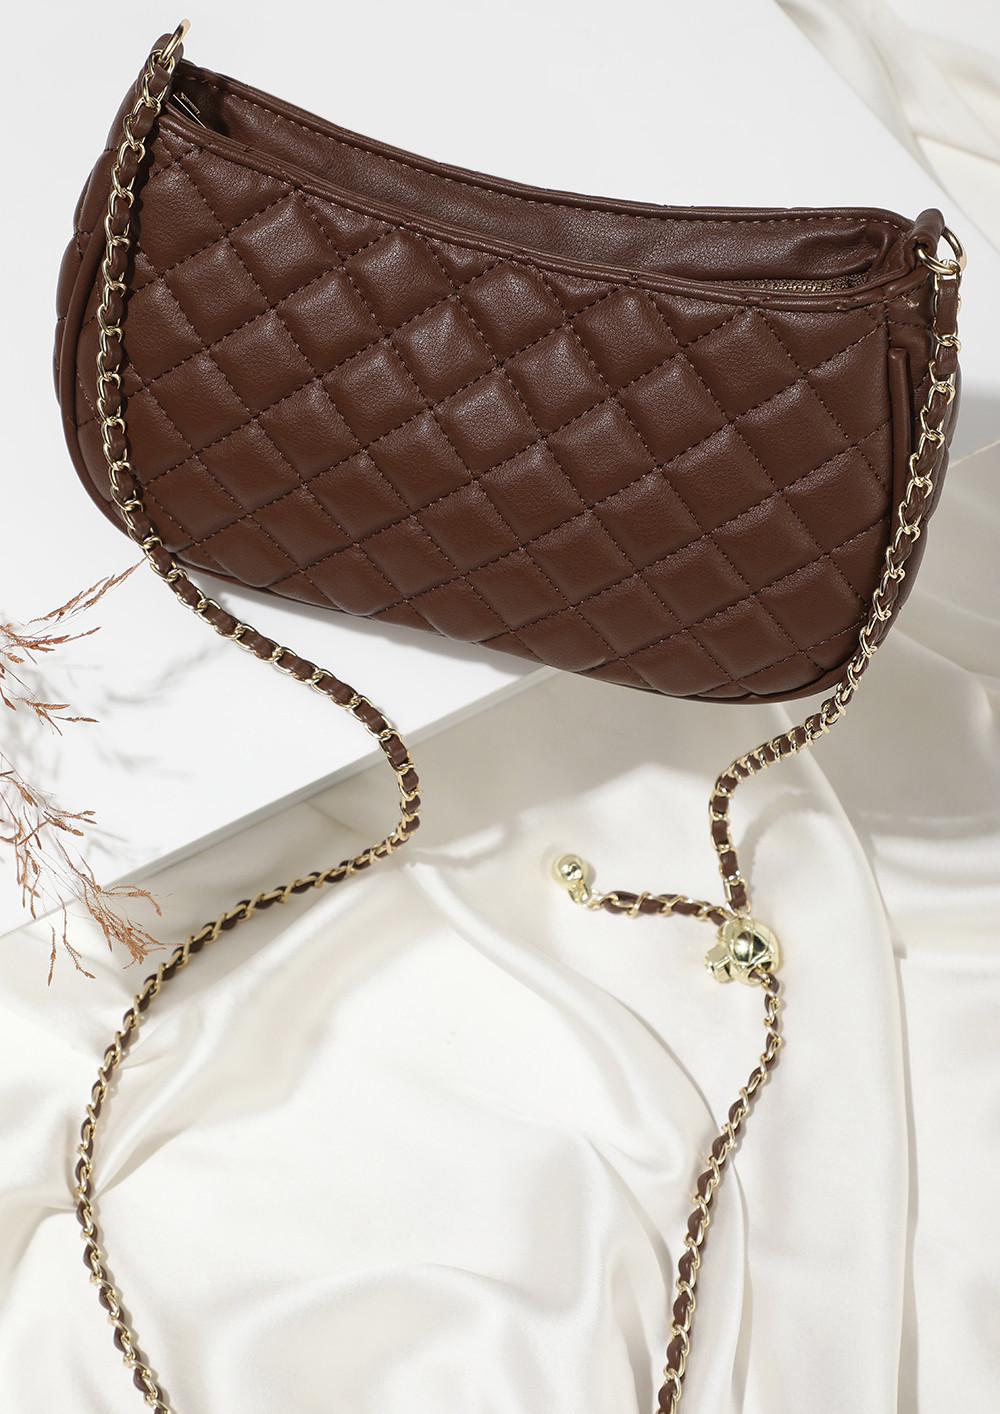 PRETTY LITTLE THINGS CHOCOLATE BROWN SLING BAG